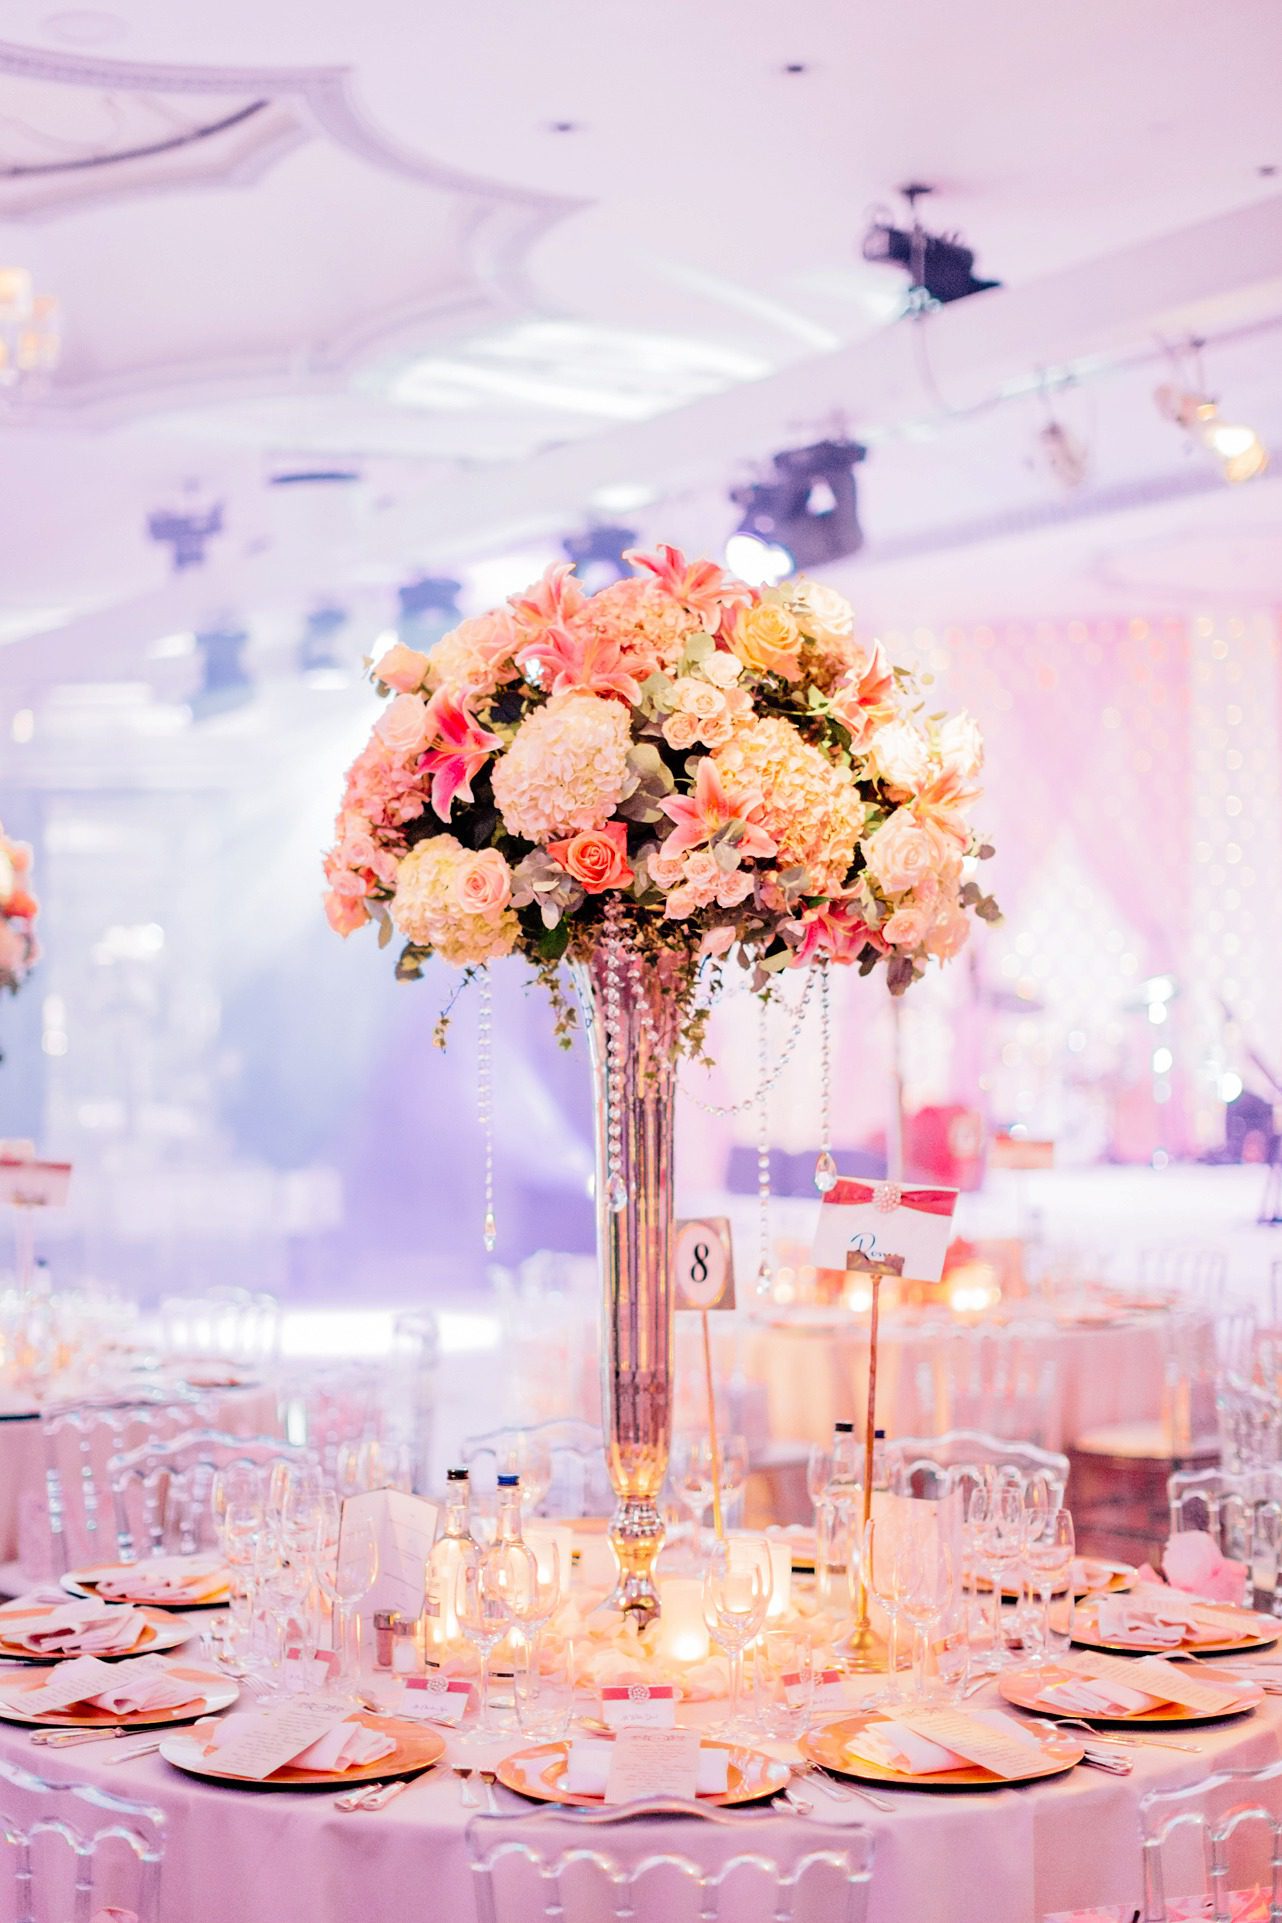 Wedding Decoration at the Dorchester Hotel in London